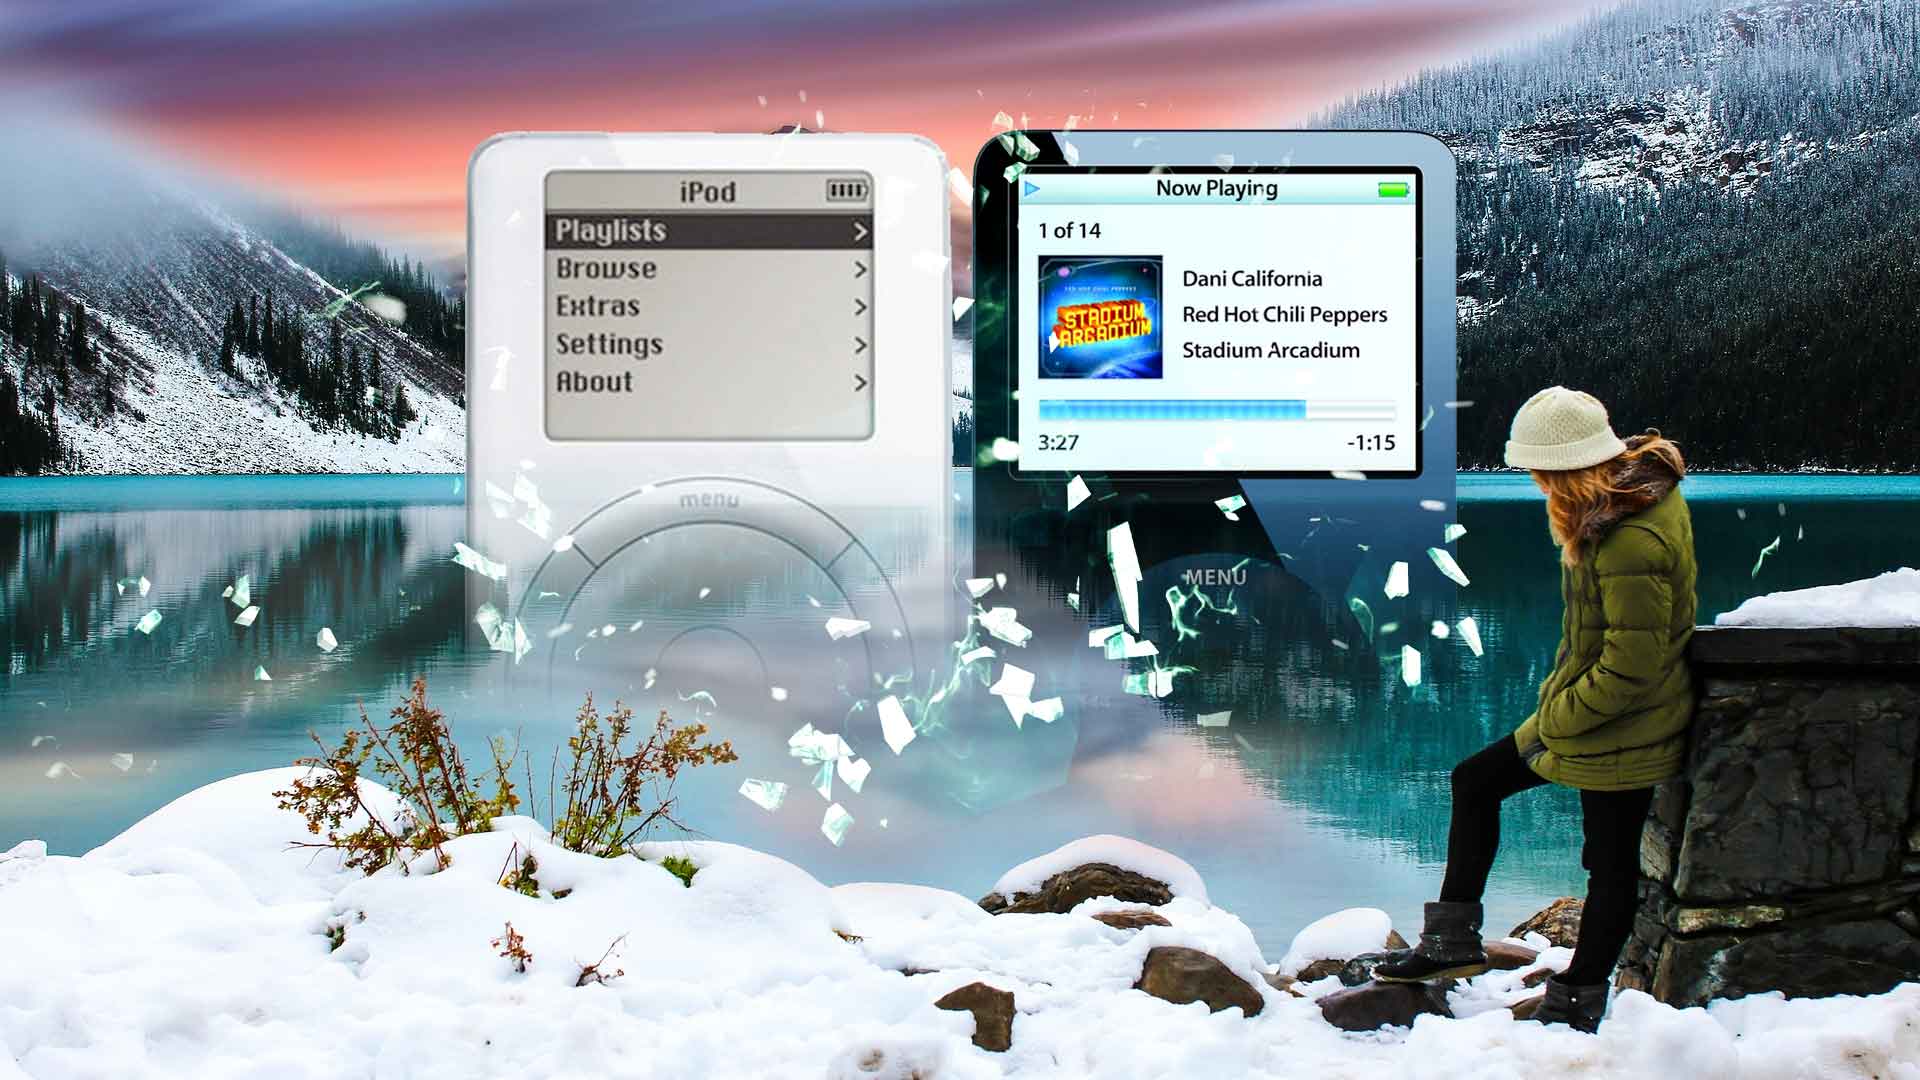 How to Reset a Frozen iPod